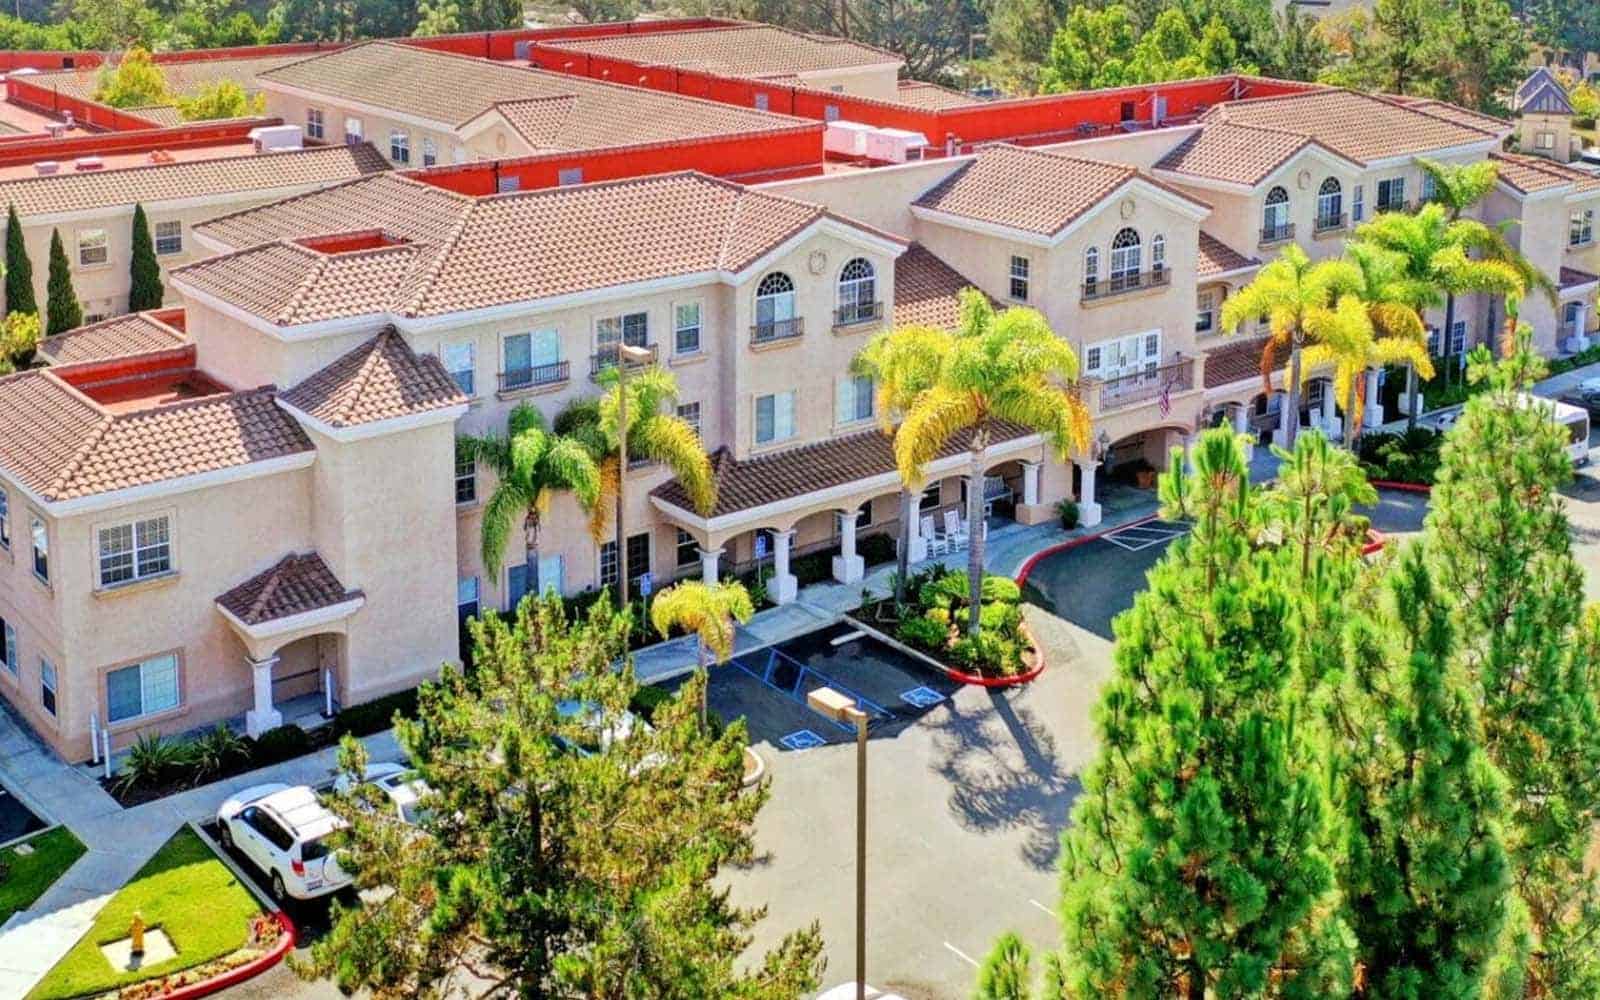 An overhead view of the Torrey Pines Senior Living facilities.